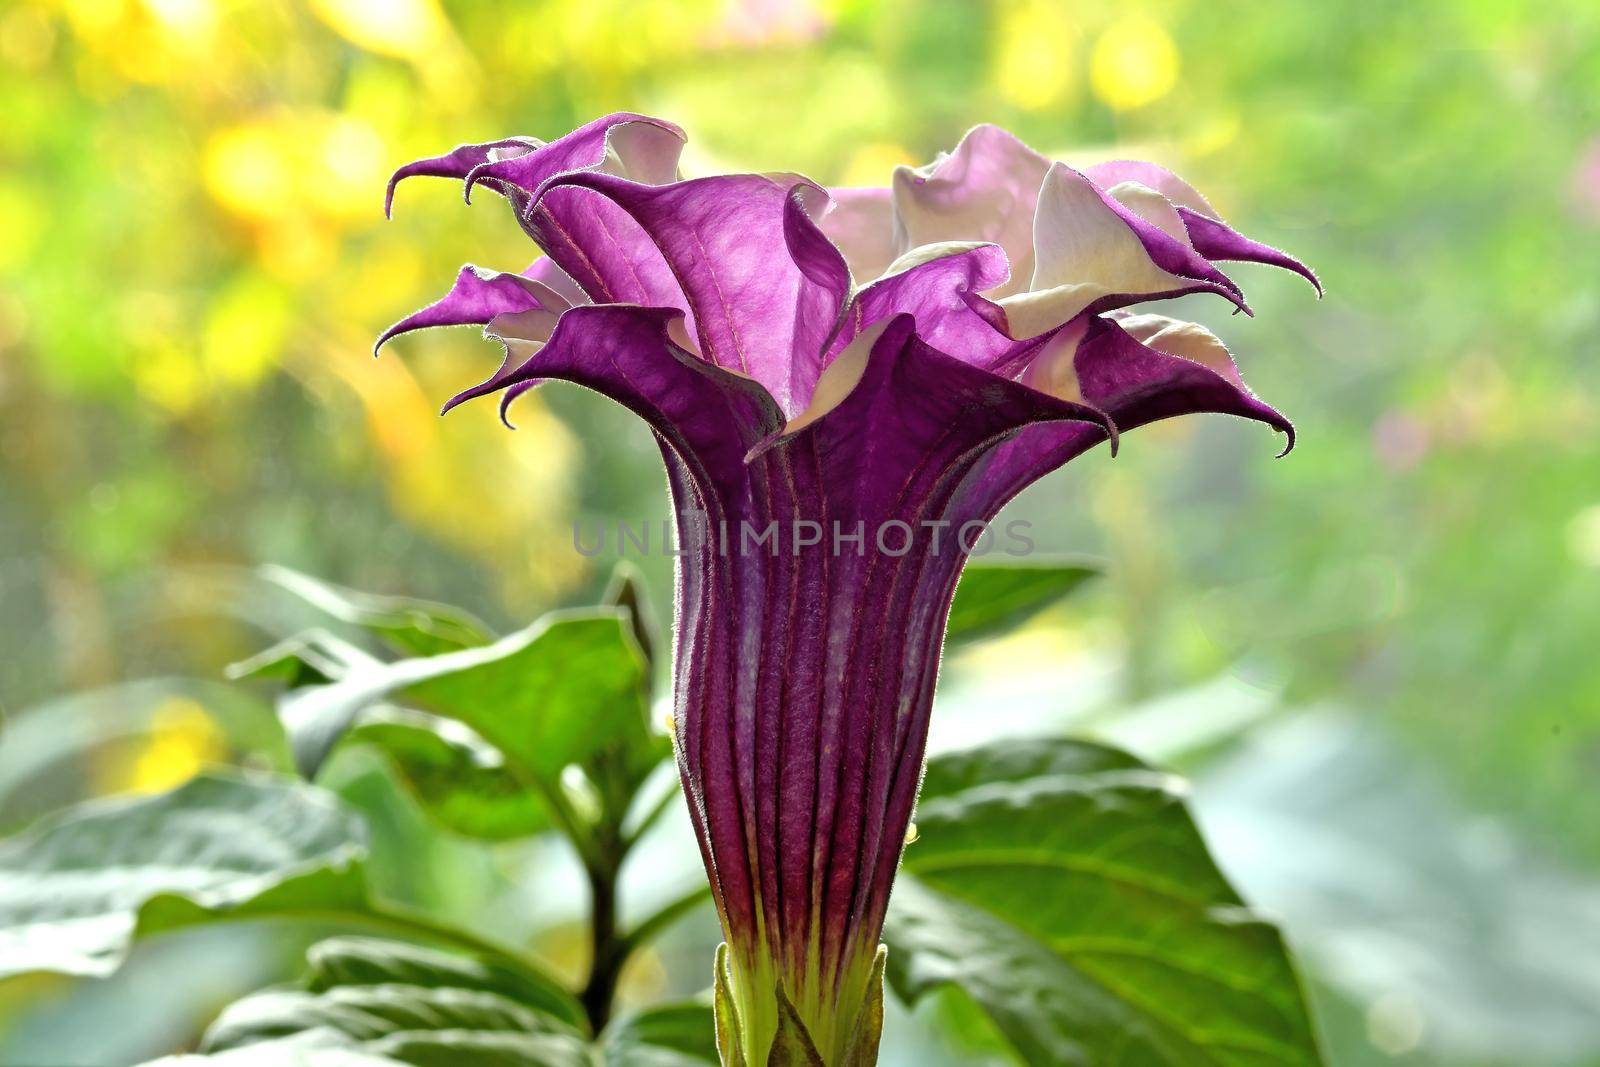 thorn apple with violet and white flower in backlit